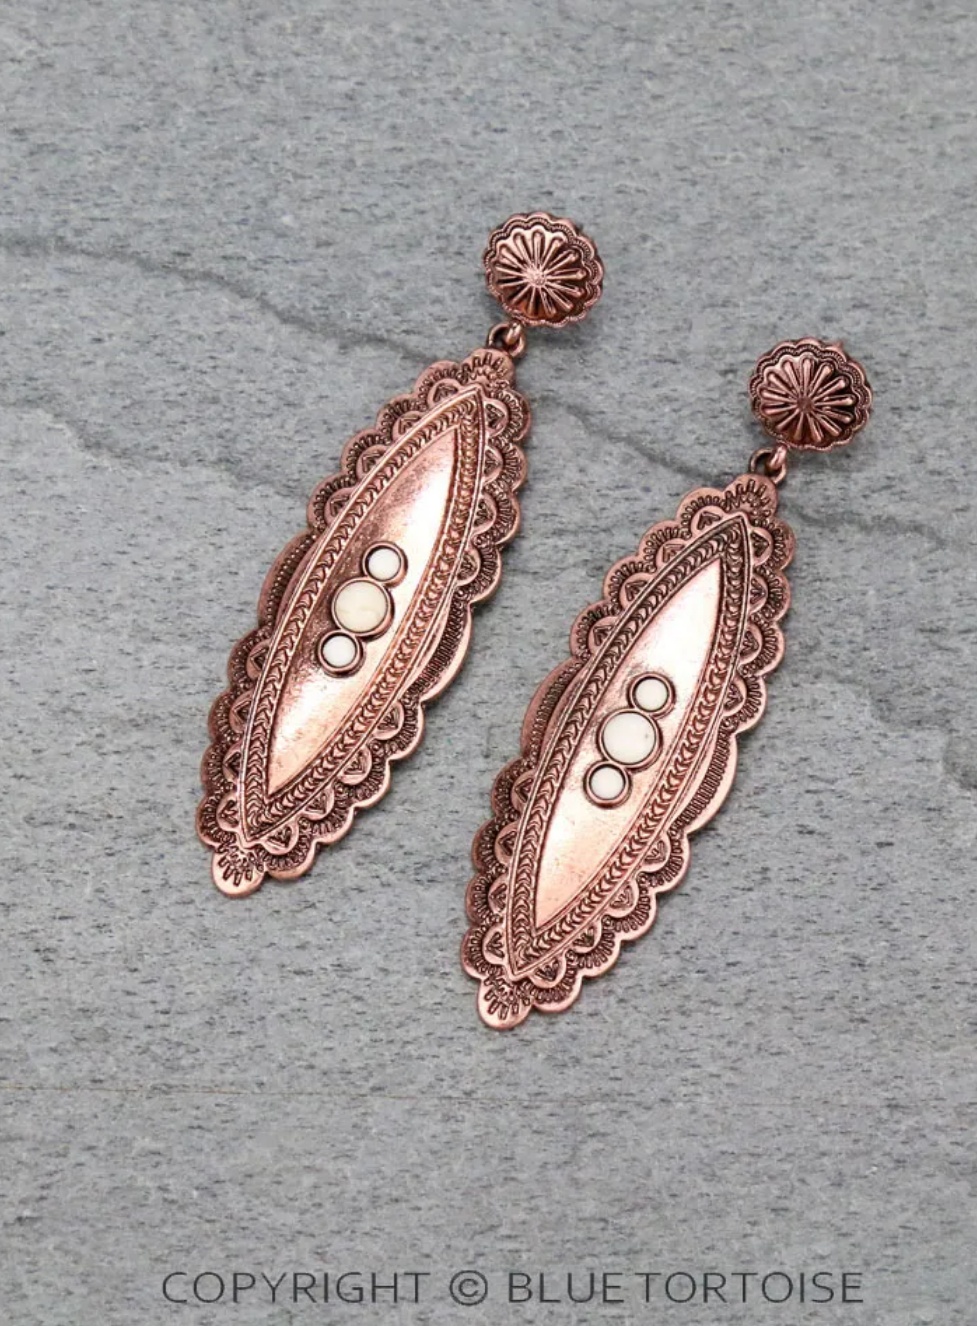 Western Oval Concho with Stone Drop Stud Earrings